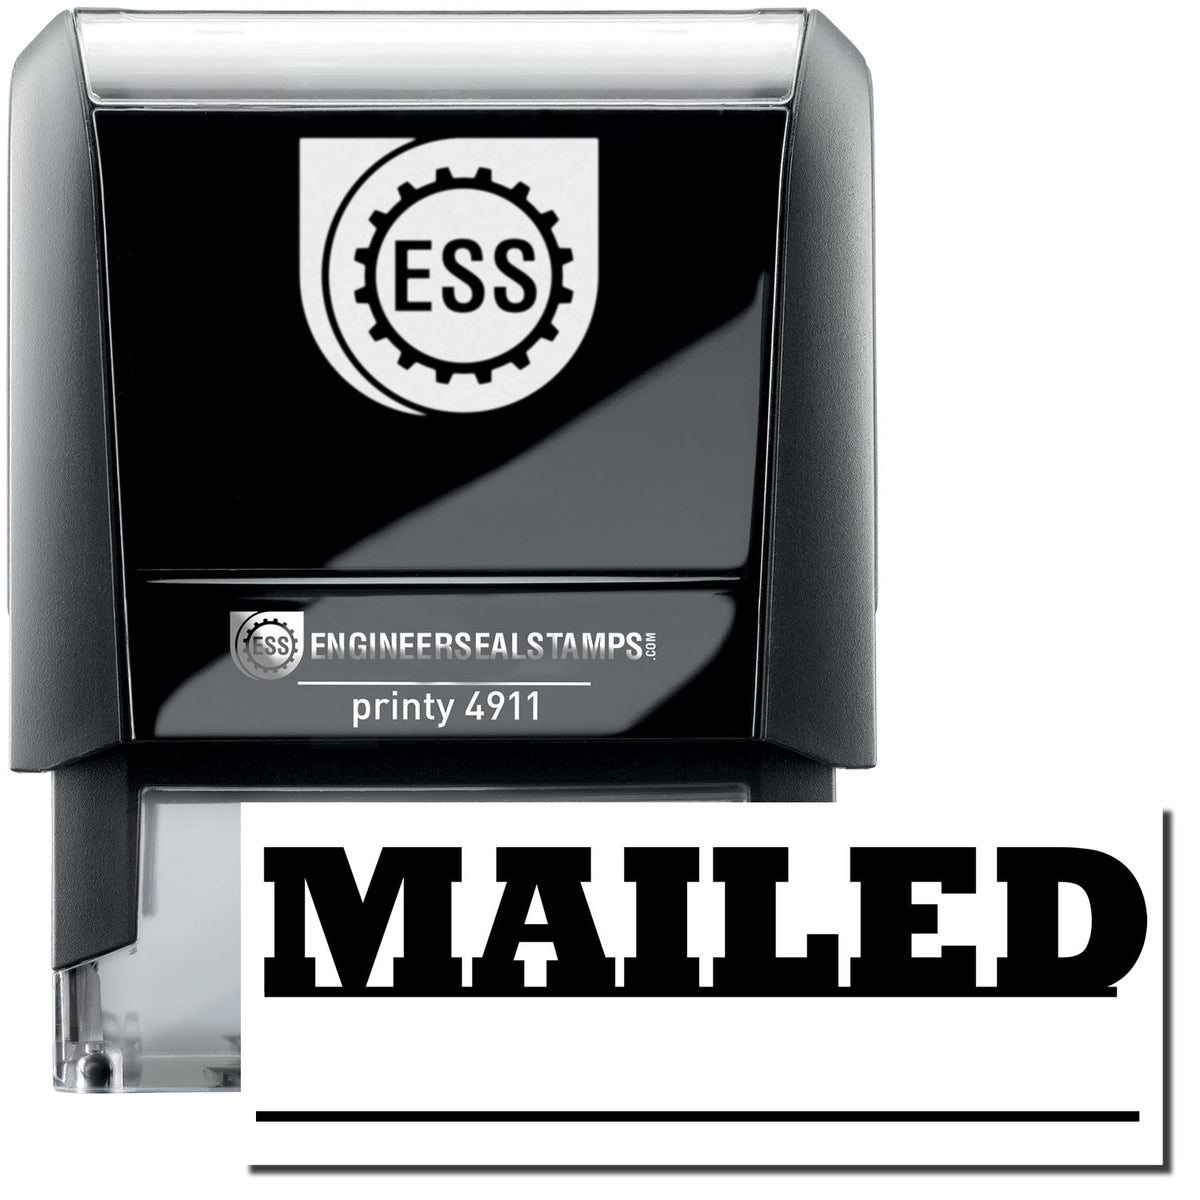 A self-inking stamp with a stamped image showing how the text &quot;MAILED&quot; in a large font with a line underneath where a date, time, or signature can be placed is displayed after stamping.